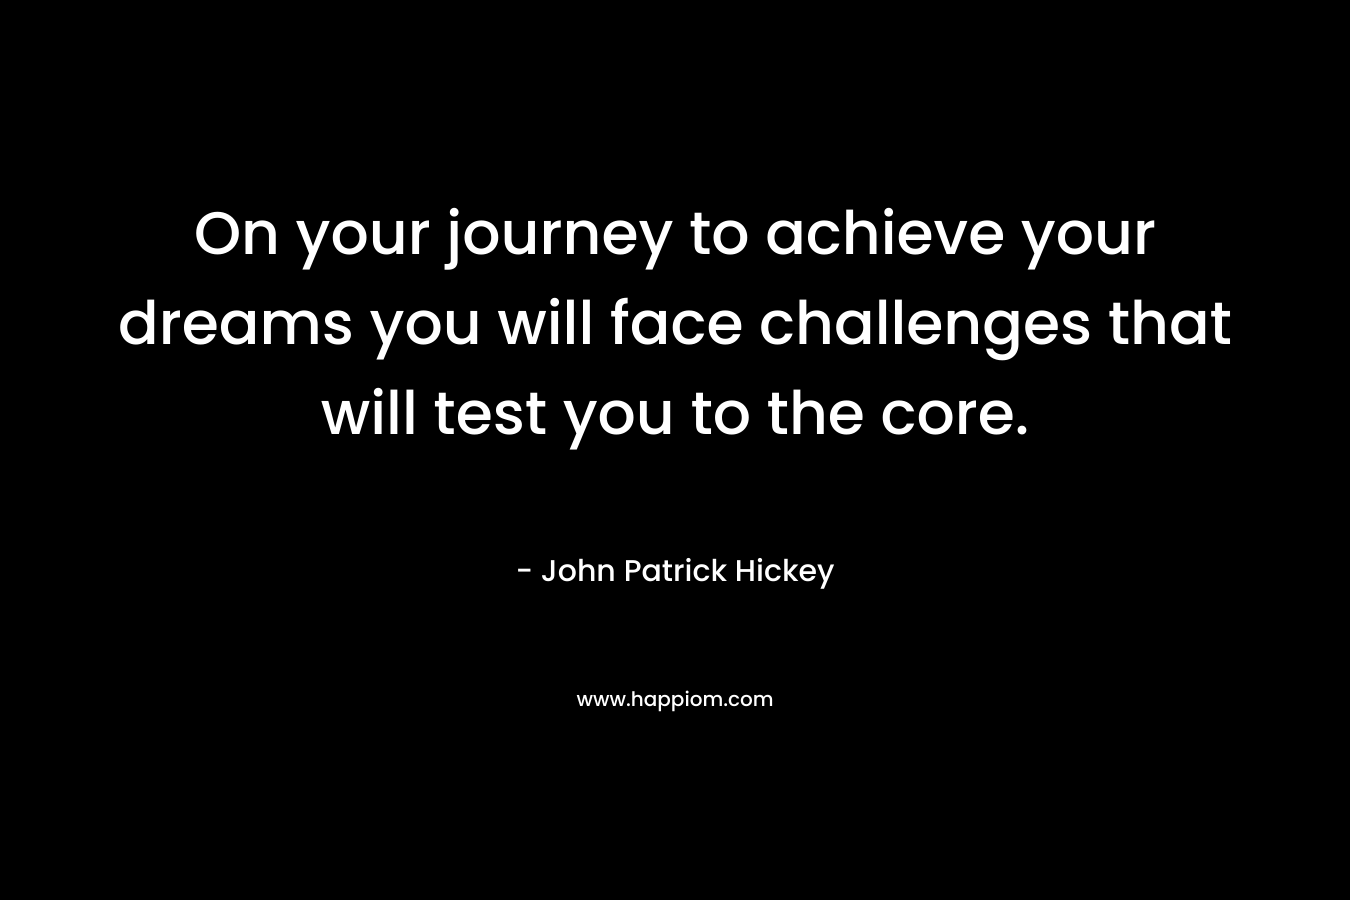 On your journey to achieve your dreams you will face challenges that will test you to the core.